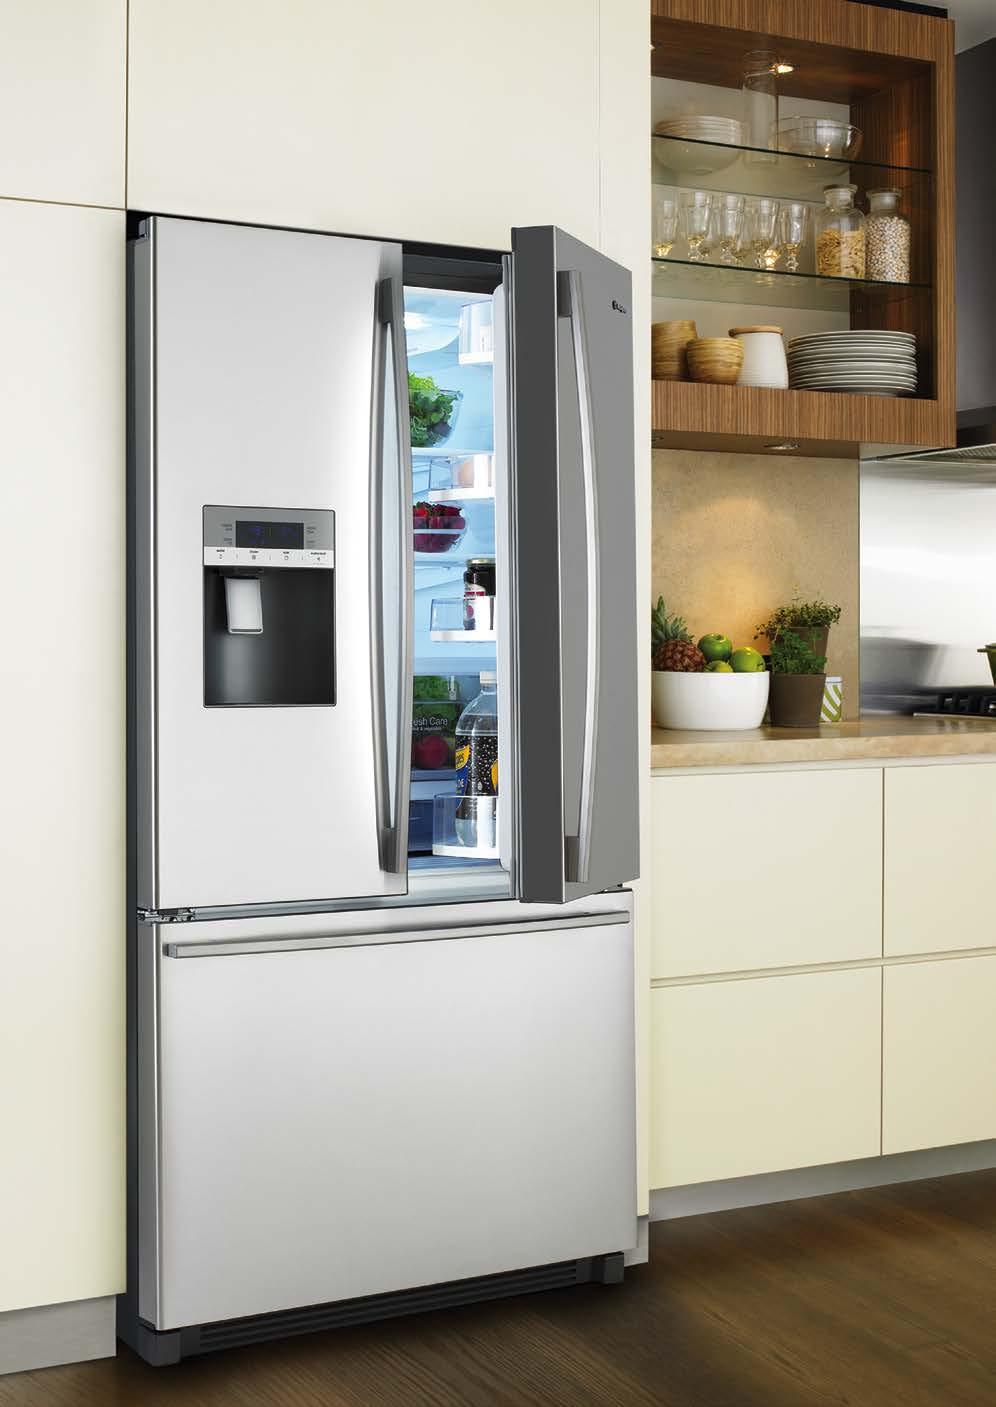 Large french door Features Model E7670SA gross capacity (litres) 762 food compartment gross capacity (litres) 512 freezer compartment gross capacity (litres) 250 dimensions (and recommended